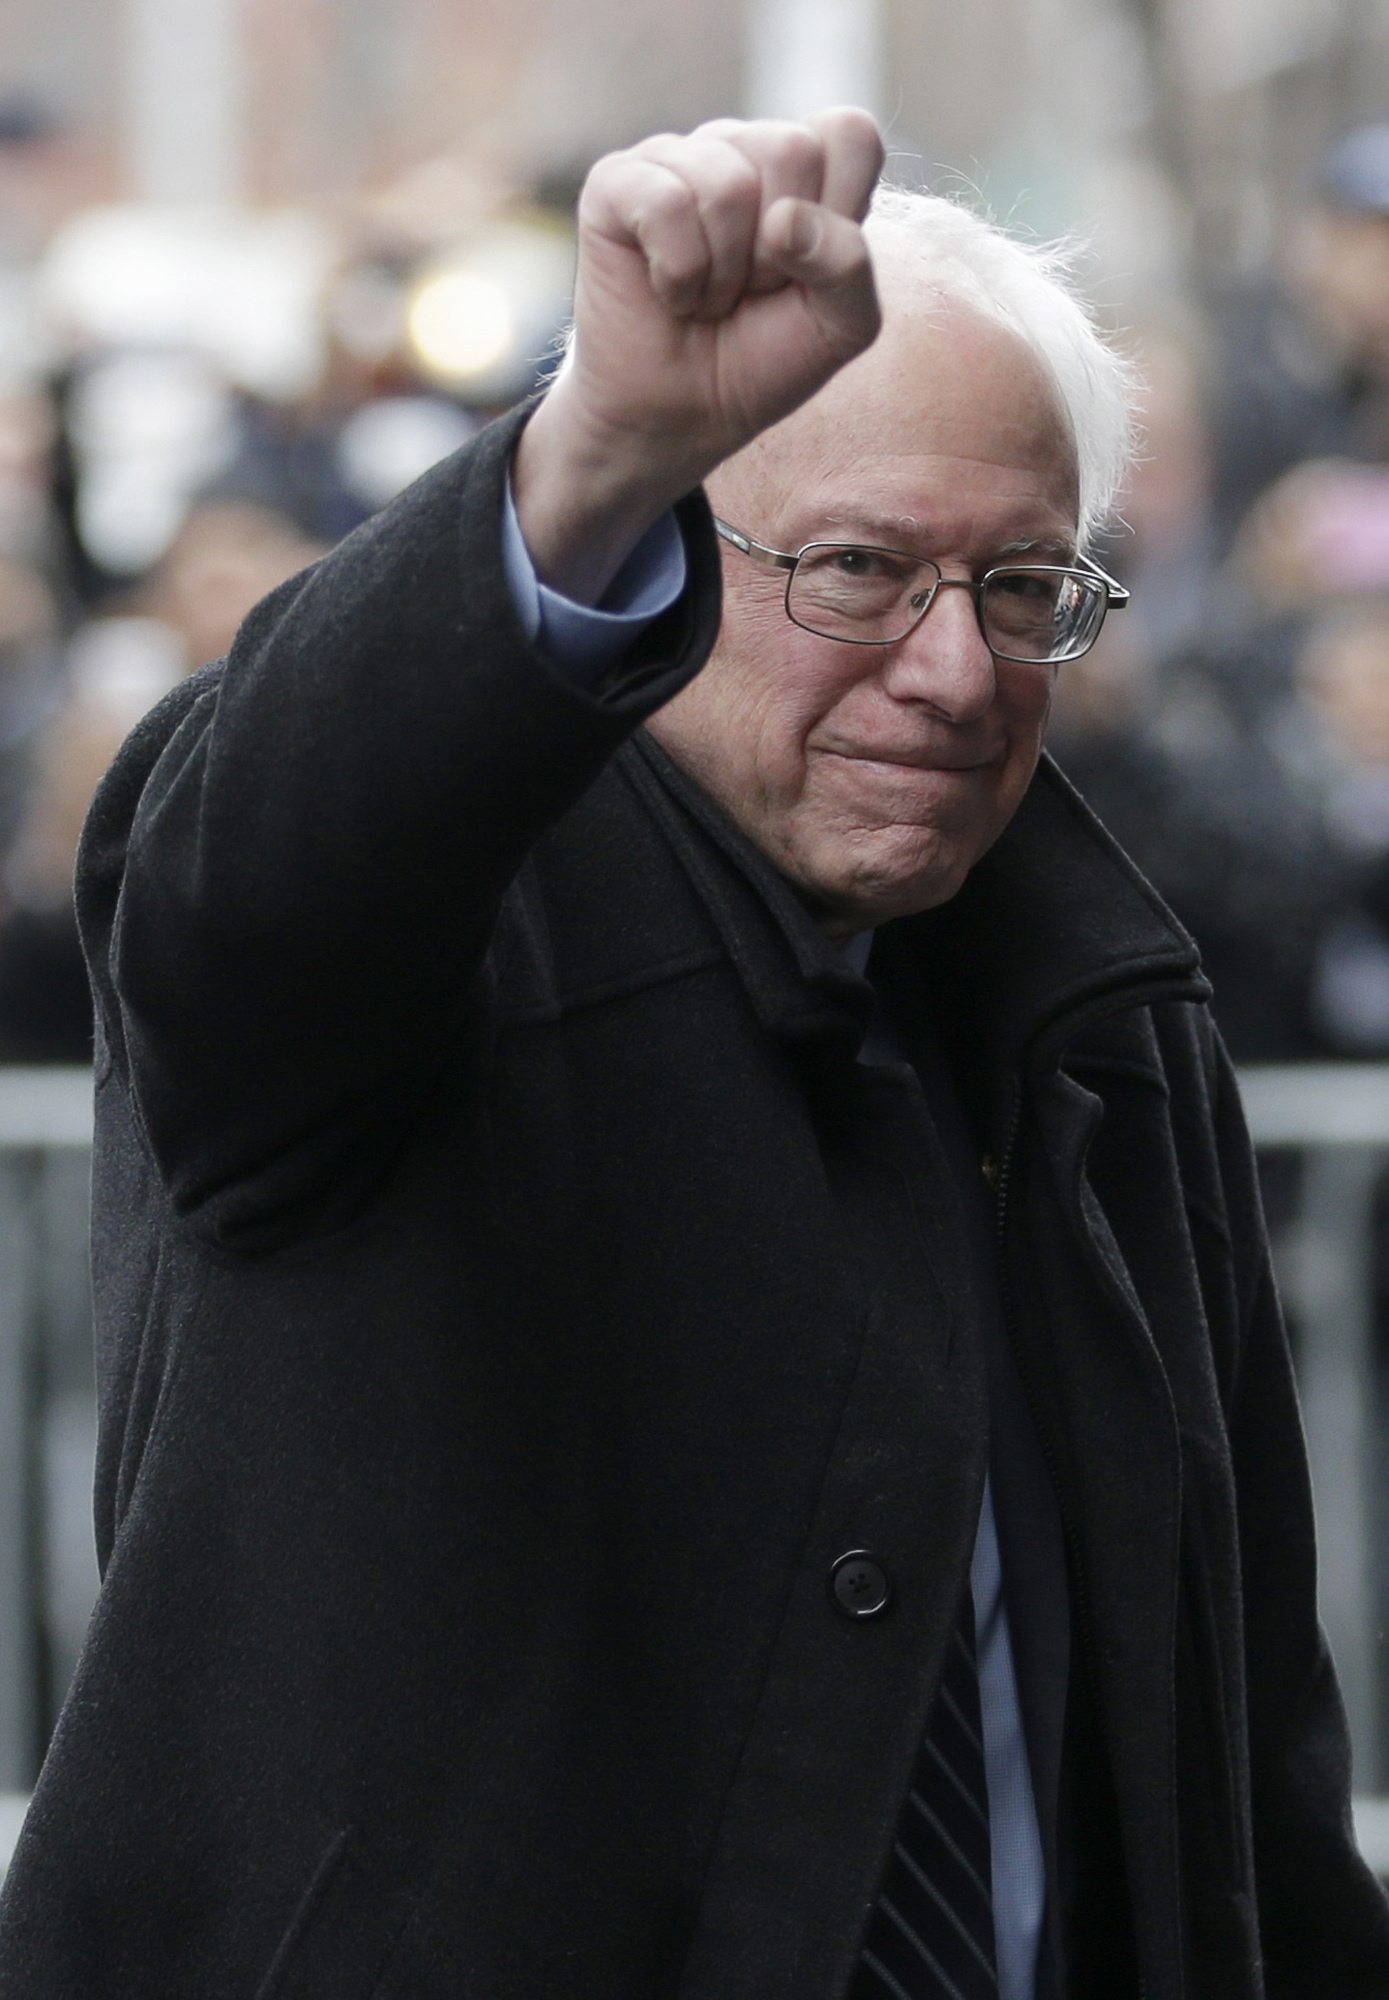 Democratic presidential candidate Sen. Bernie Sanders, I-Vt., raises a fist as he arrives for a breakfast meeting with Al Sharpton at Sylvia&#039;s Restaurant on Wednesday in the Harlem neighborhood of New York.